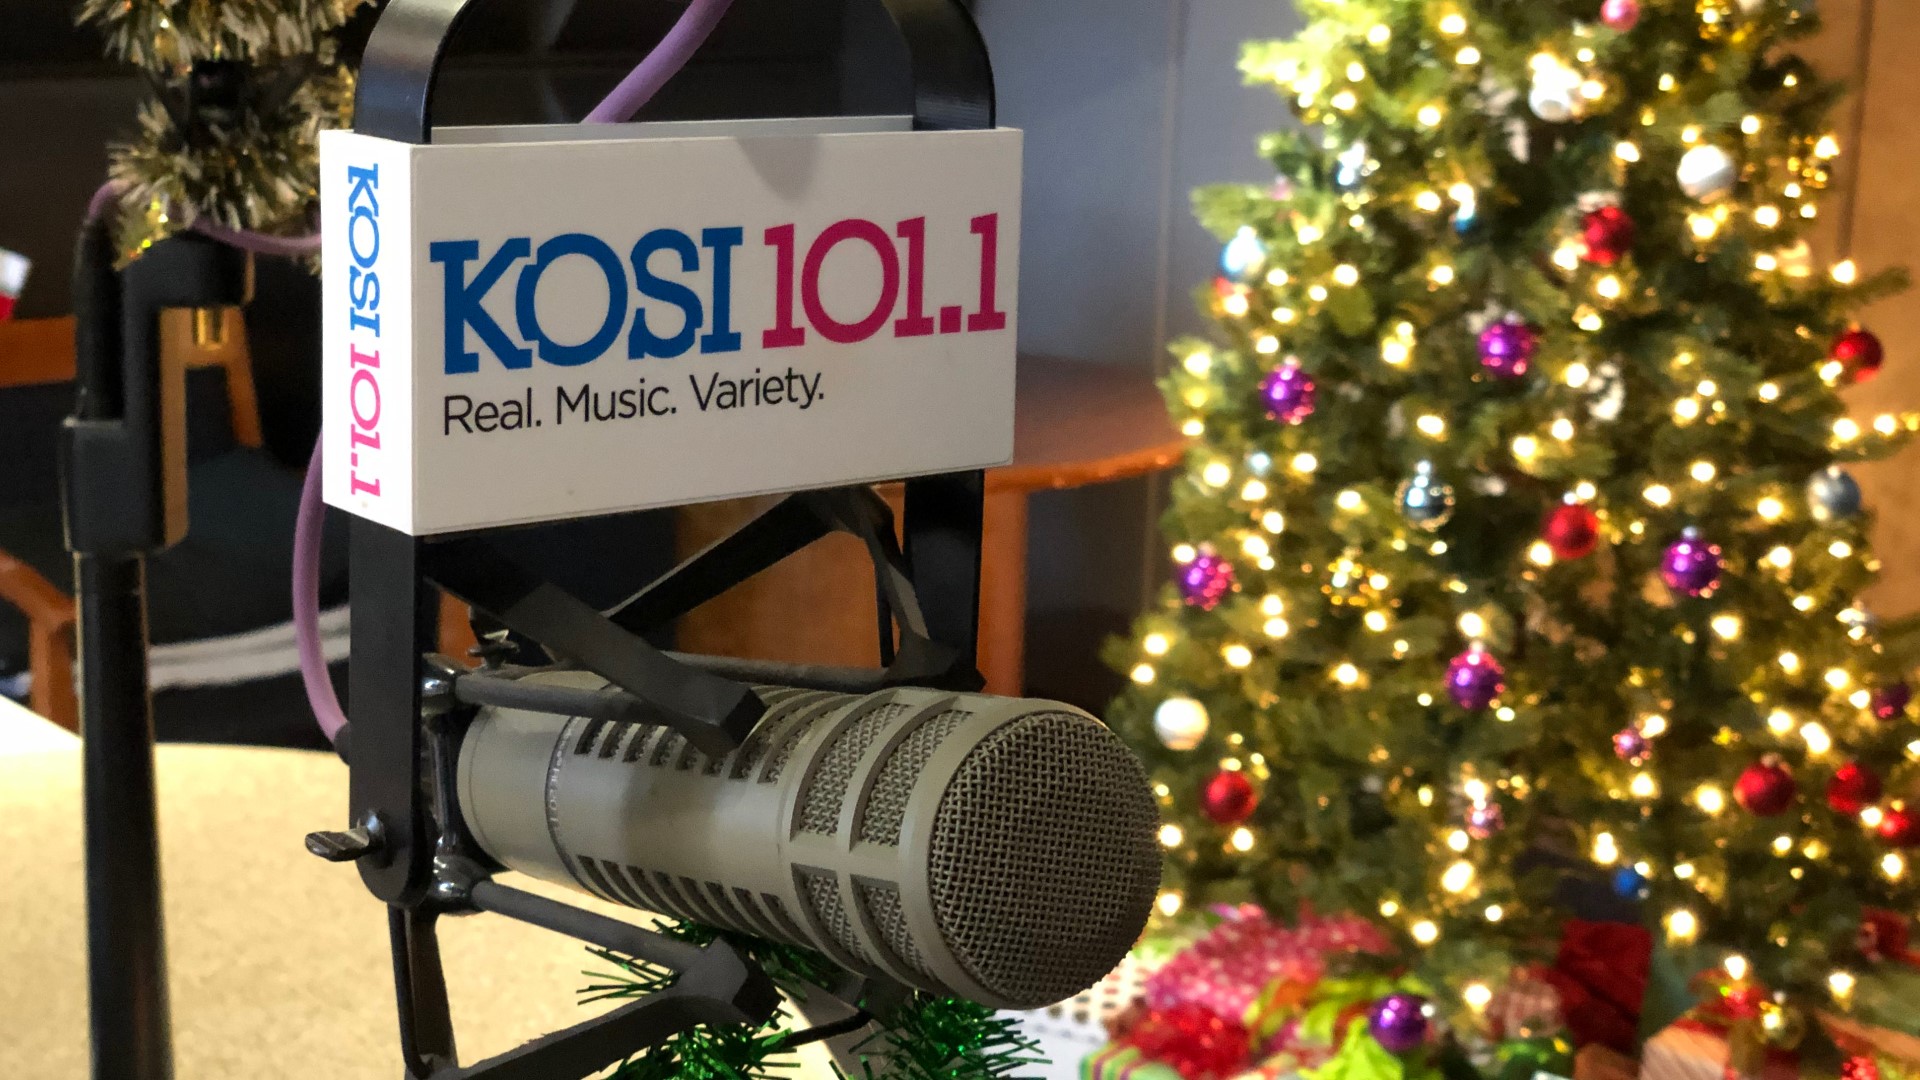 KOSI 101 radio to play Christmas music in Denver for 22nd year